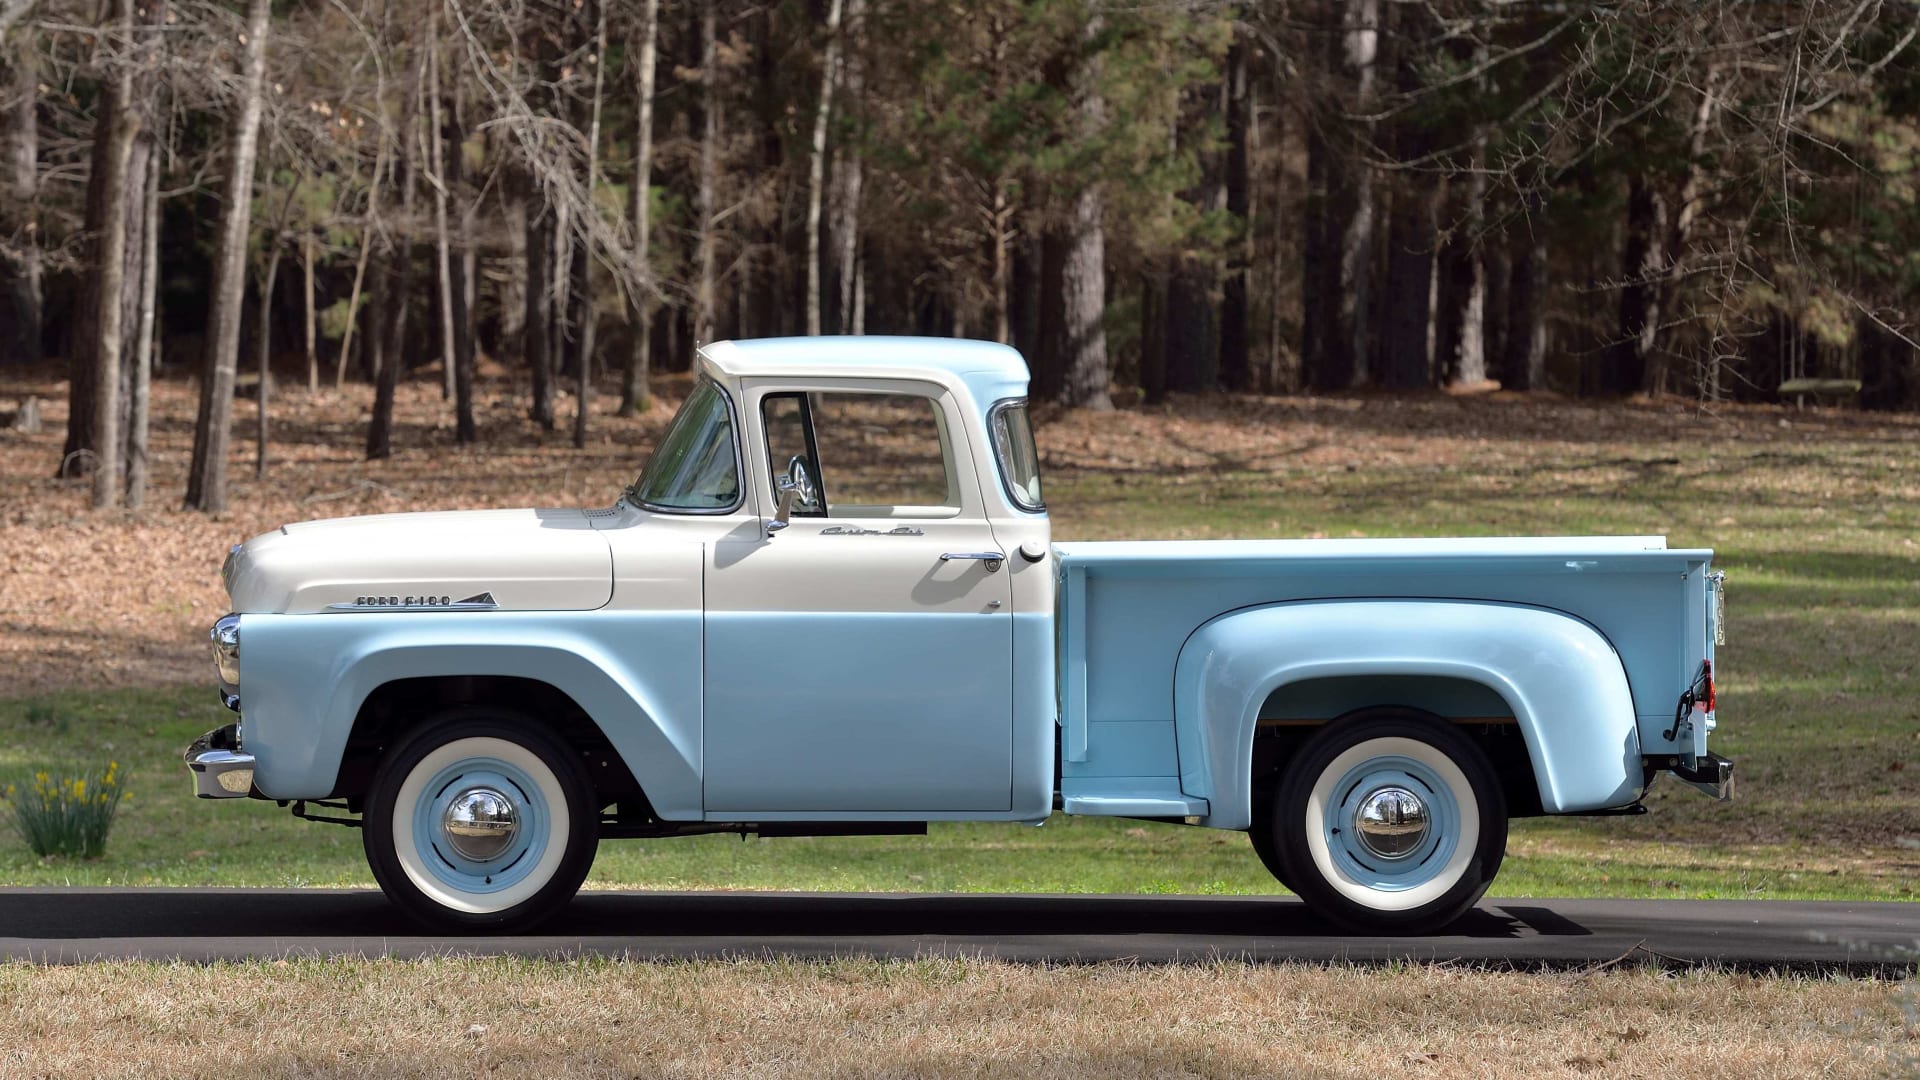 1958 Ford F100 Pickup At Indy 2018 As F211 Mecum Auctions